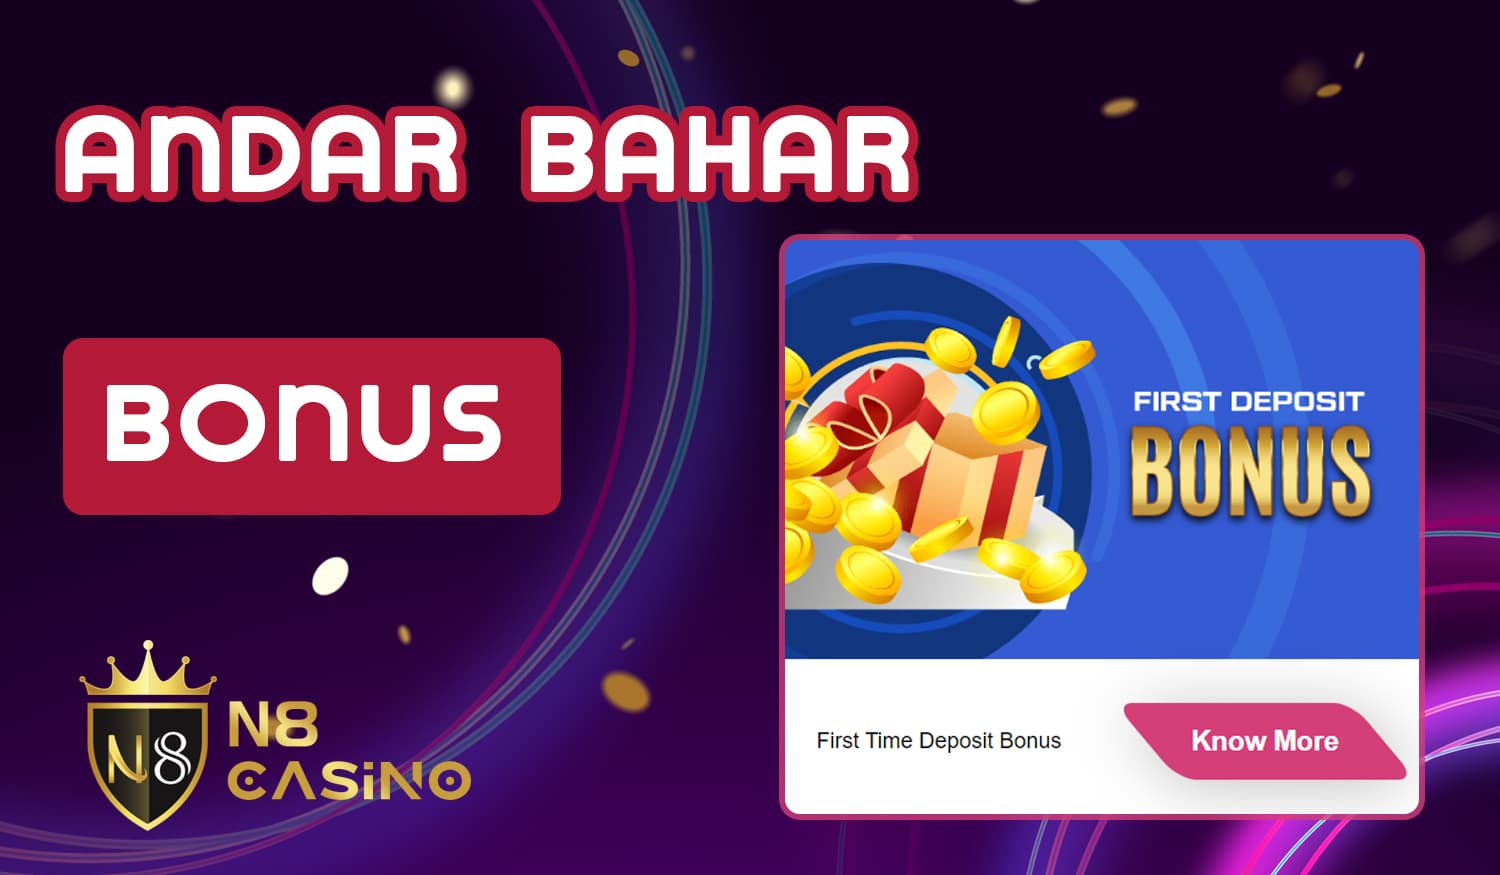 Welcome and other bonuses available to N8 Casino users 